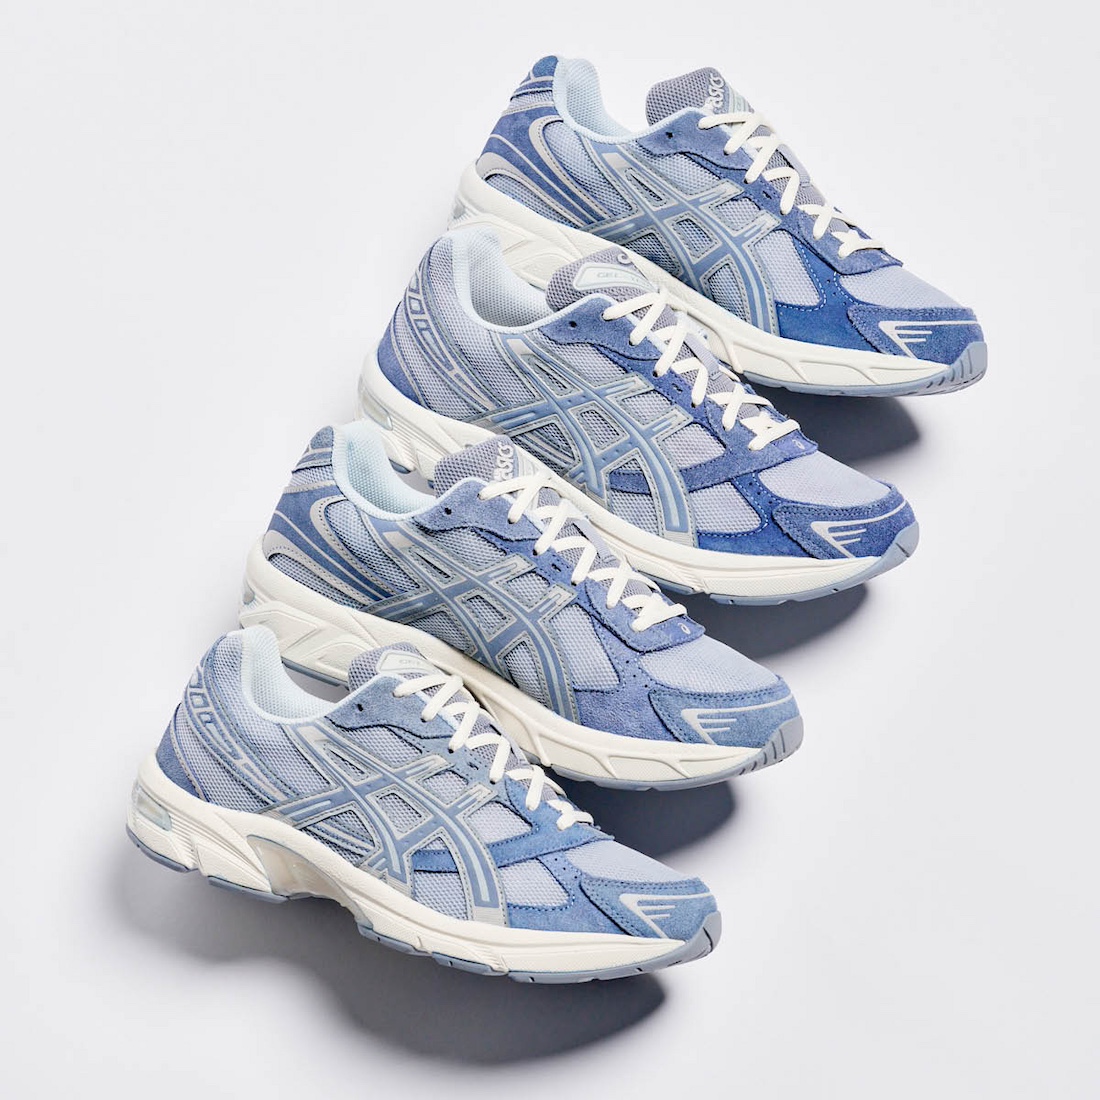 asics tiger gel lyte v gore tex august delivery